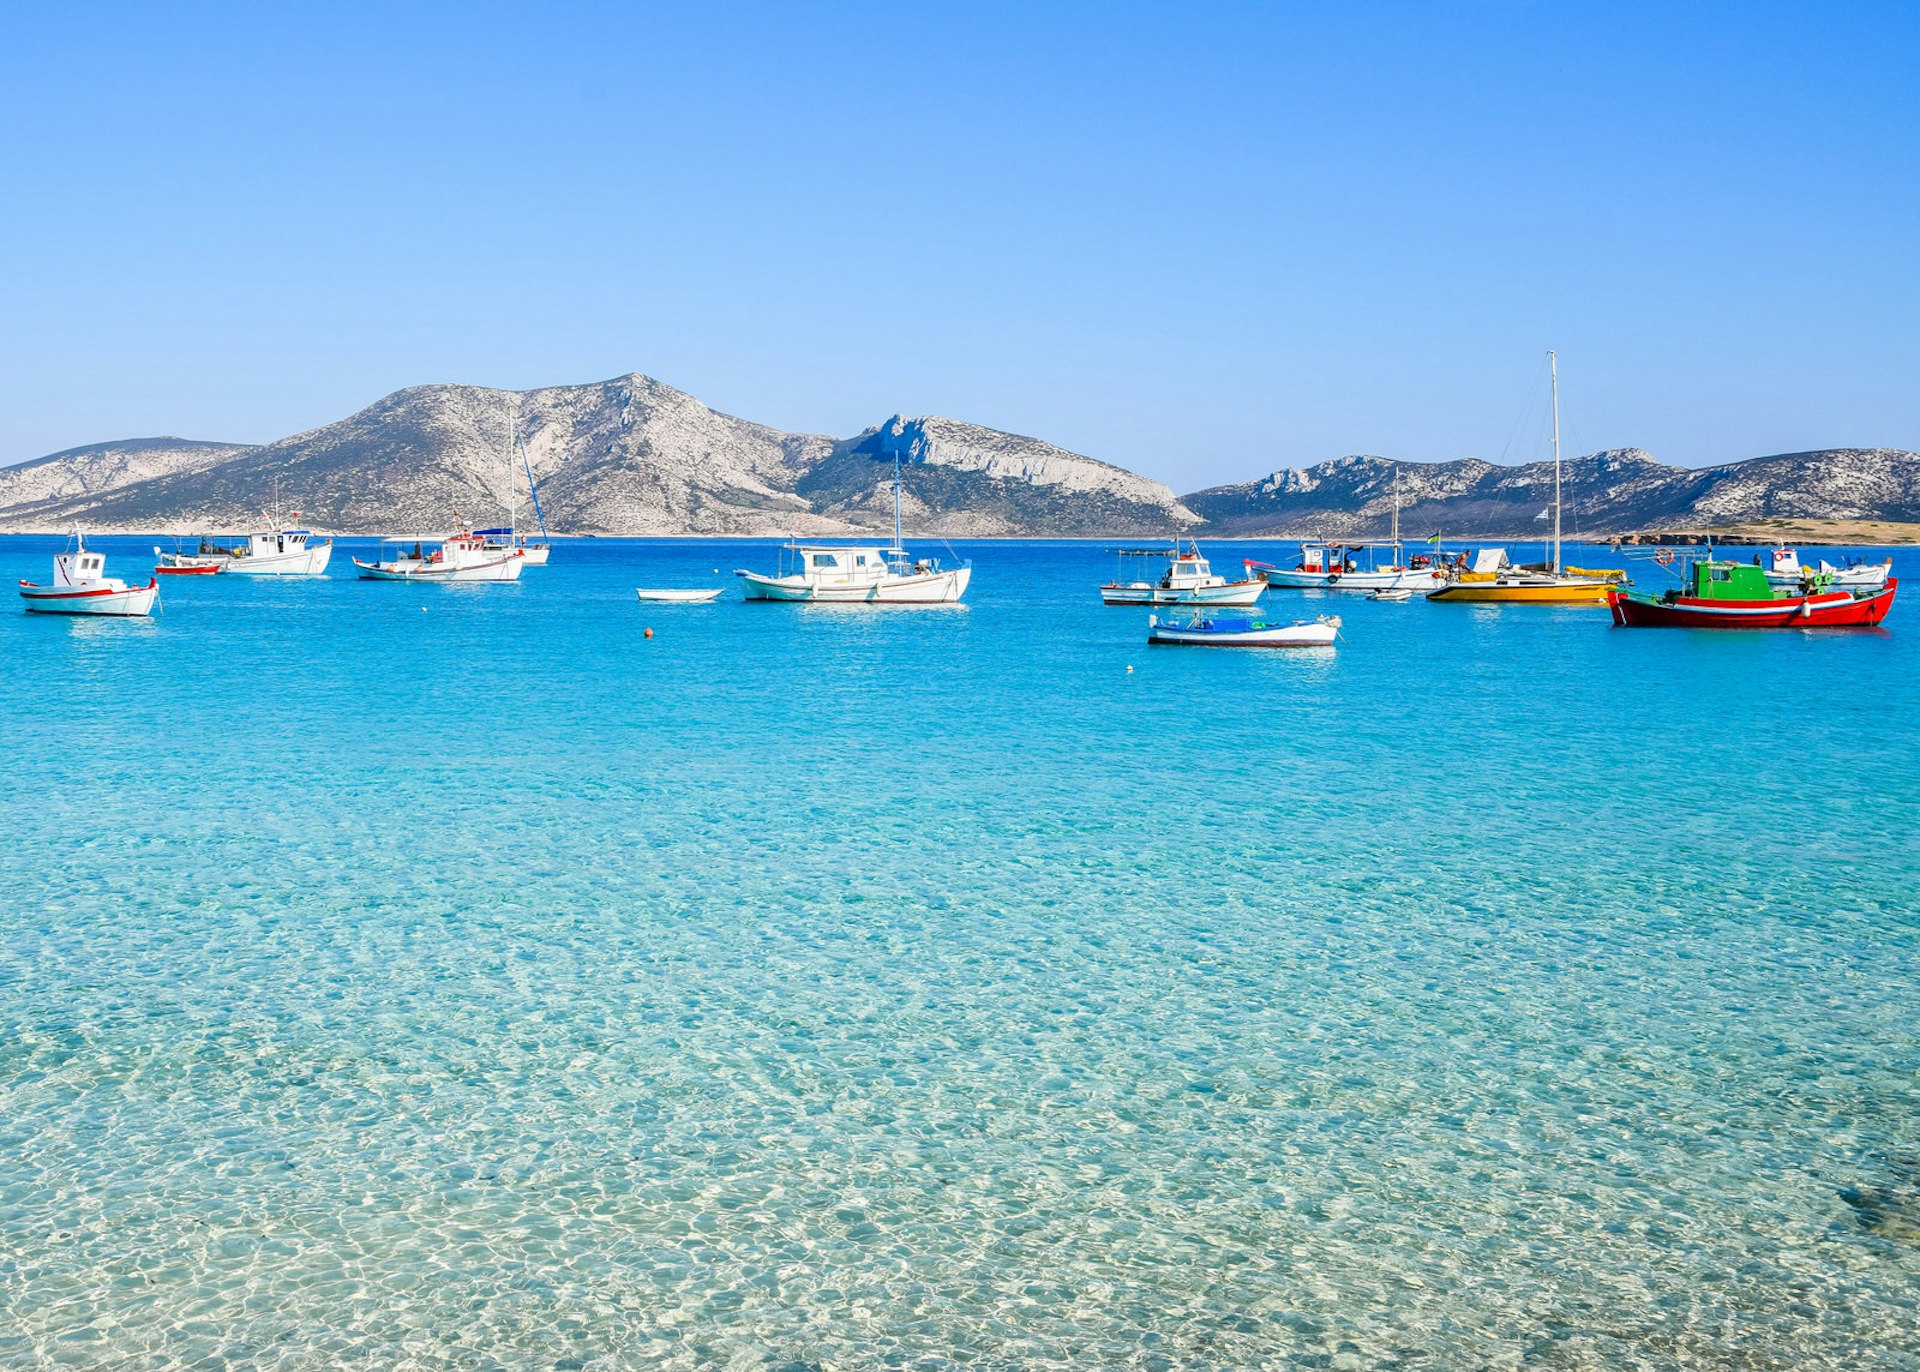 Traditional fishing boats bob in the shallows of Koufonisia, the best-known of the Small Cyclades © Nicole Kwiatkowski / Shutterstock